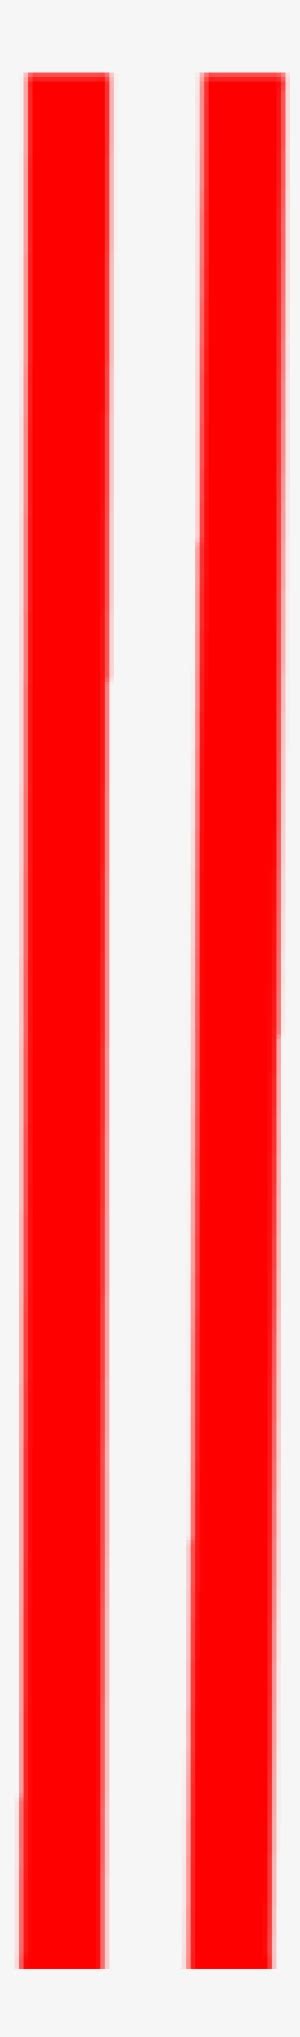 Red Stripes Png Image Transparent Red Racing Stripe Png Free